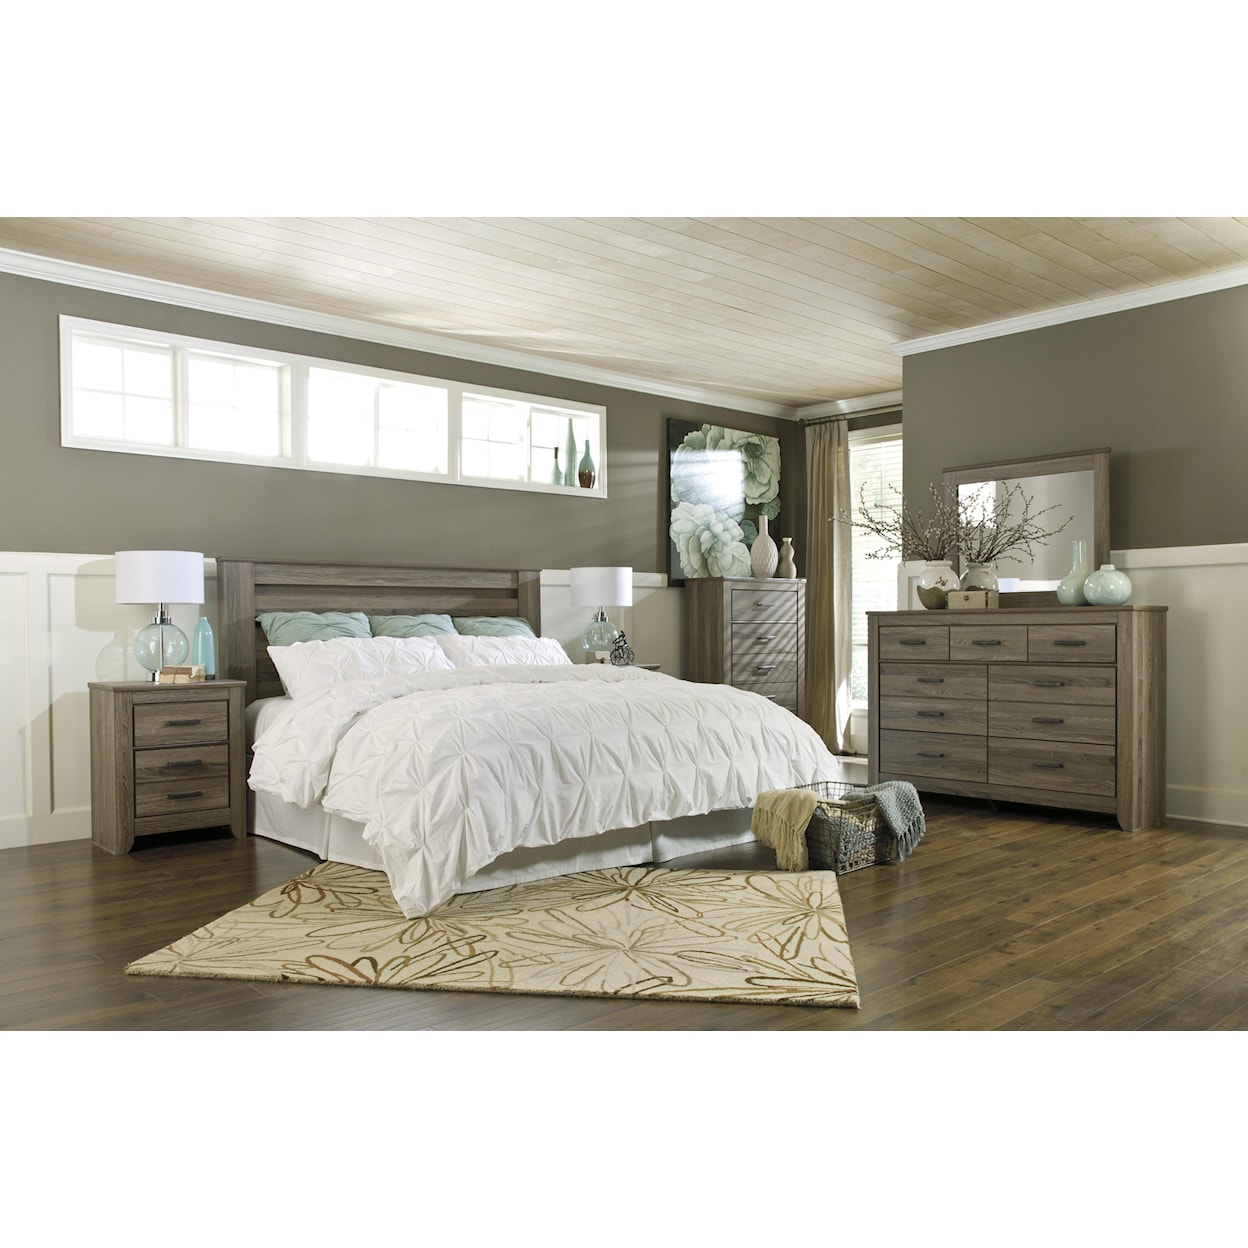 Signature Design by Ashley Zelen 5pc King Bedroom Group